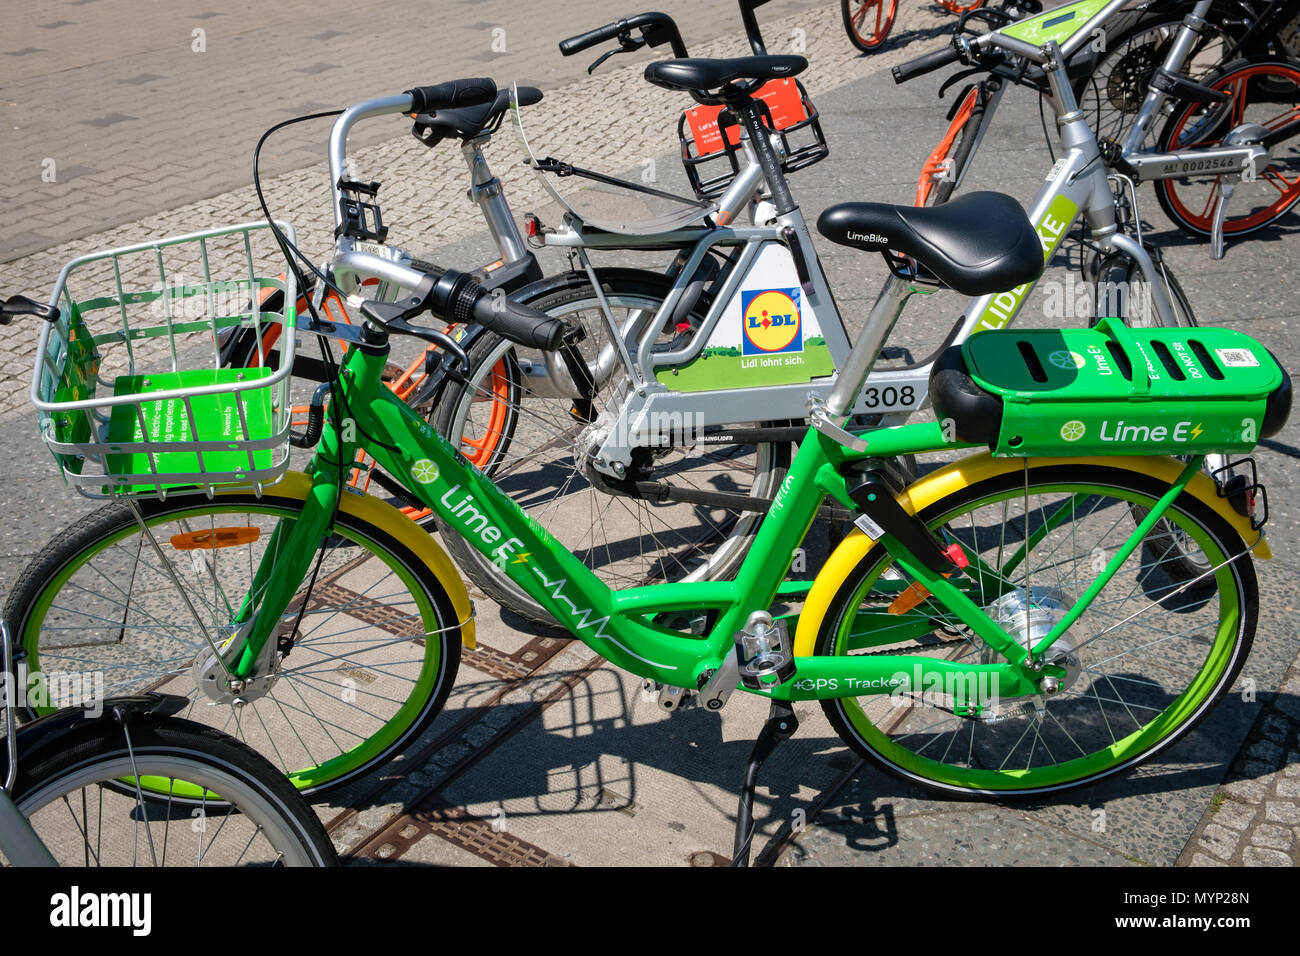 Berlin, Germany - june 2018: Many electric bicycles  of public bike sharing company LimeBike in Berlin, Germany Stock Photo